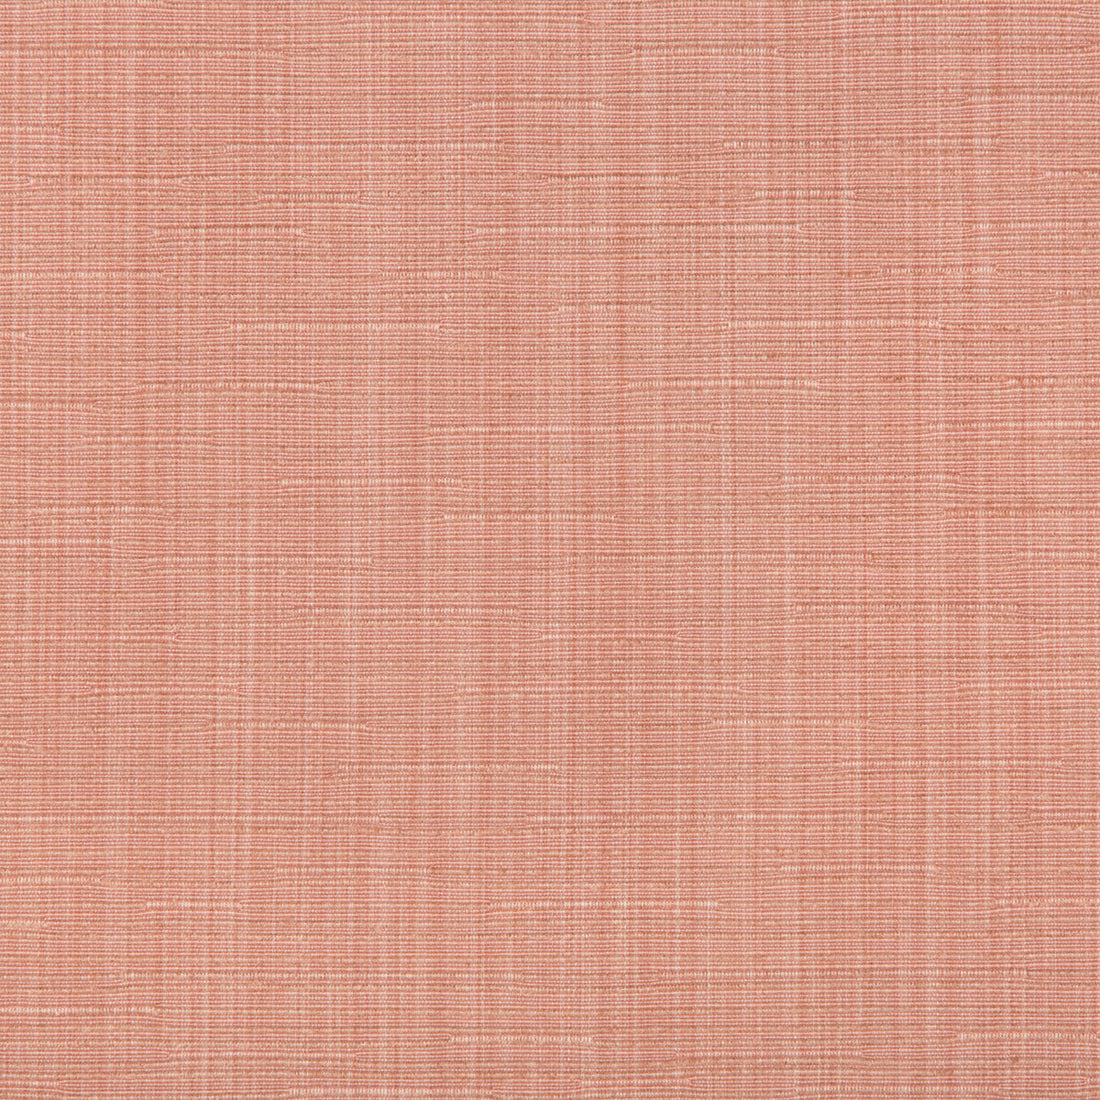 Somerset Strie fabric in rose color - pattern 2018150.7.0 - by Lee Jofa in the Somerset Strie collection